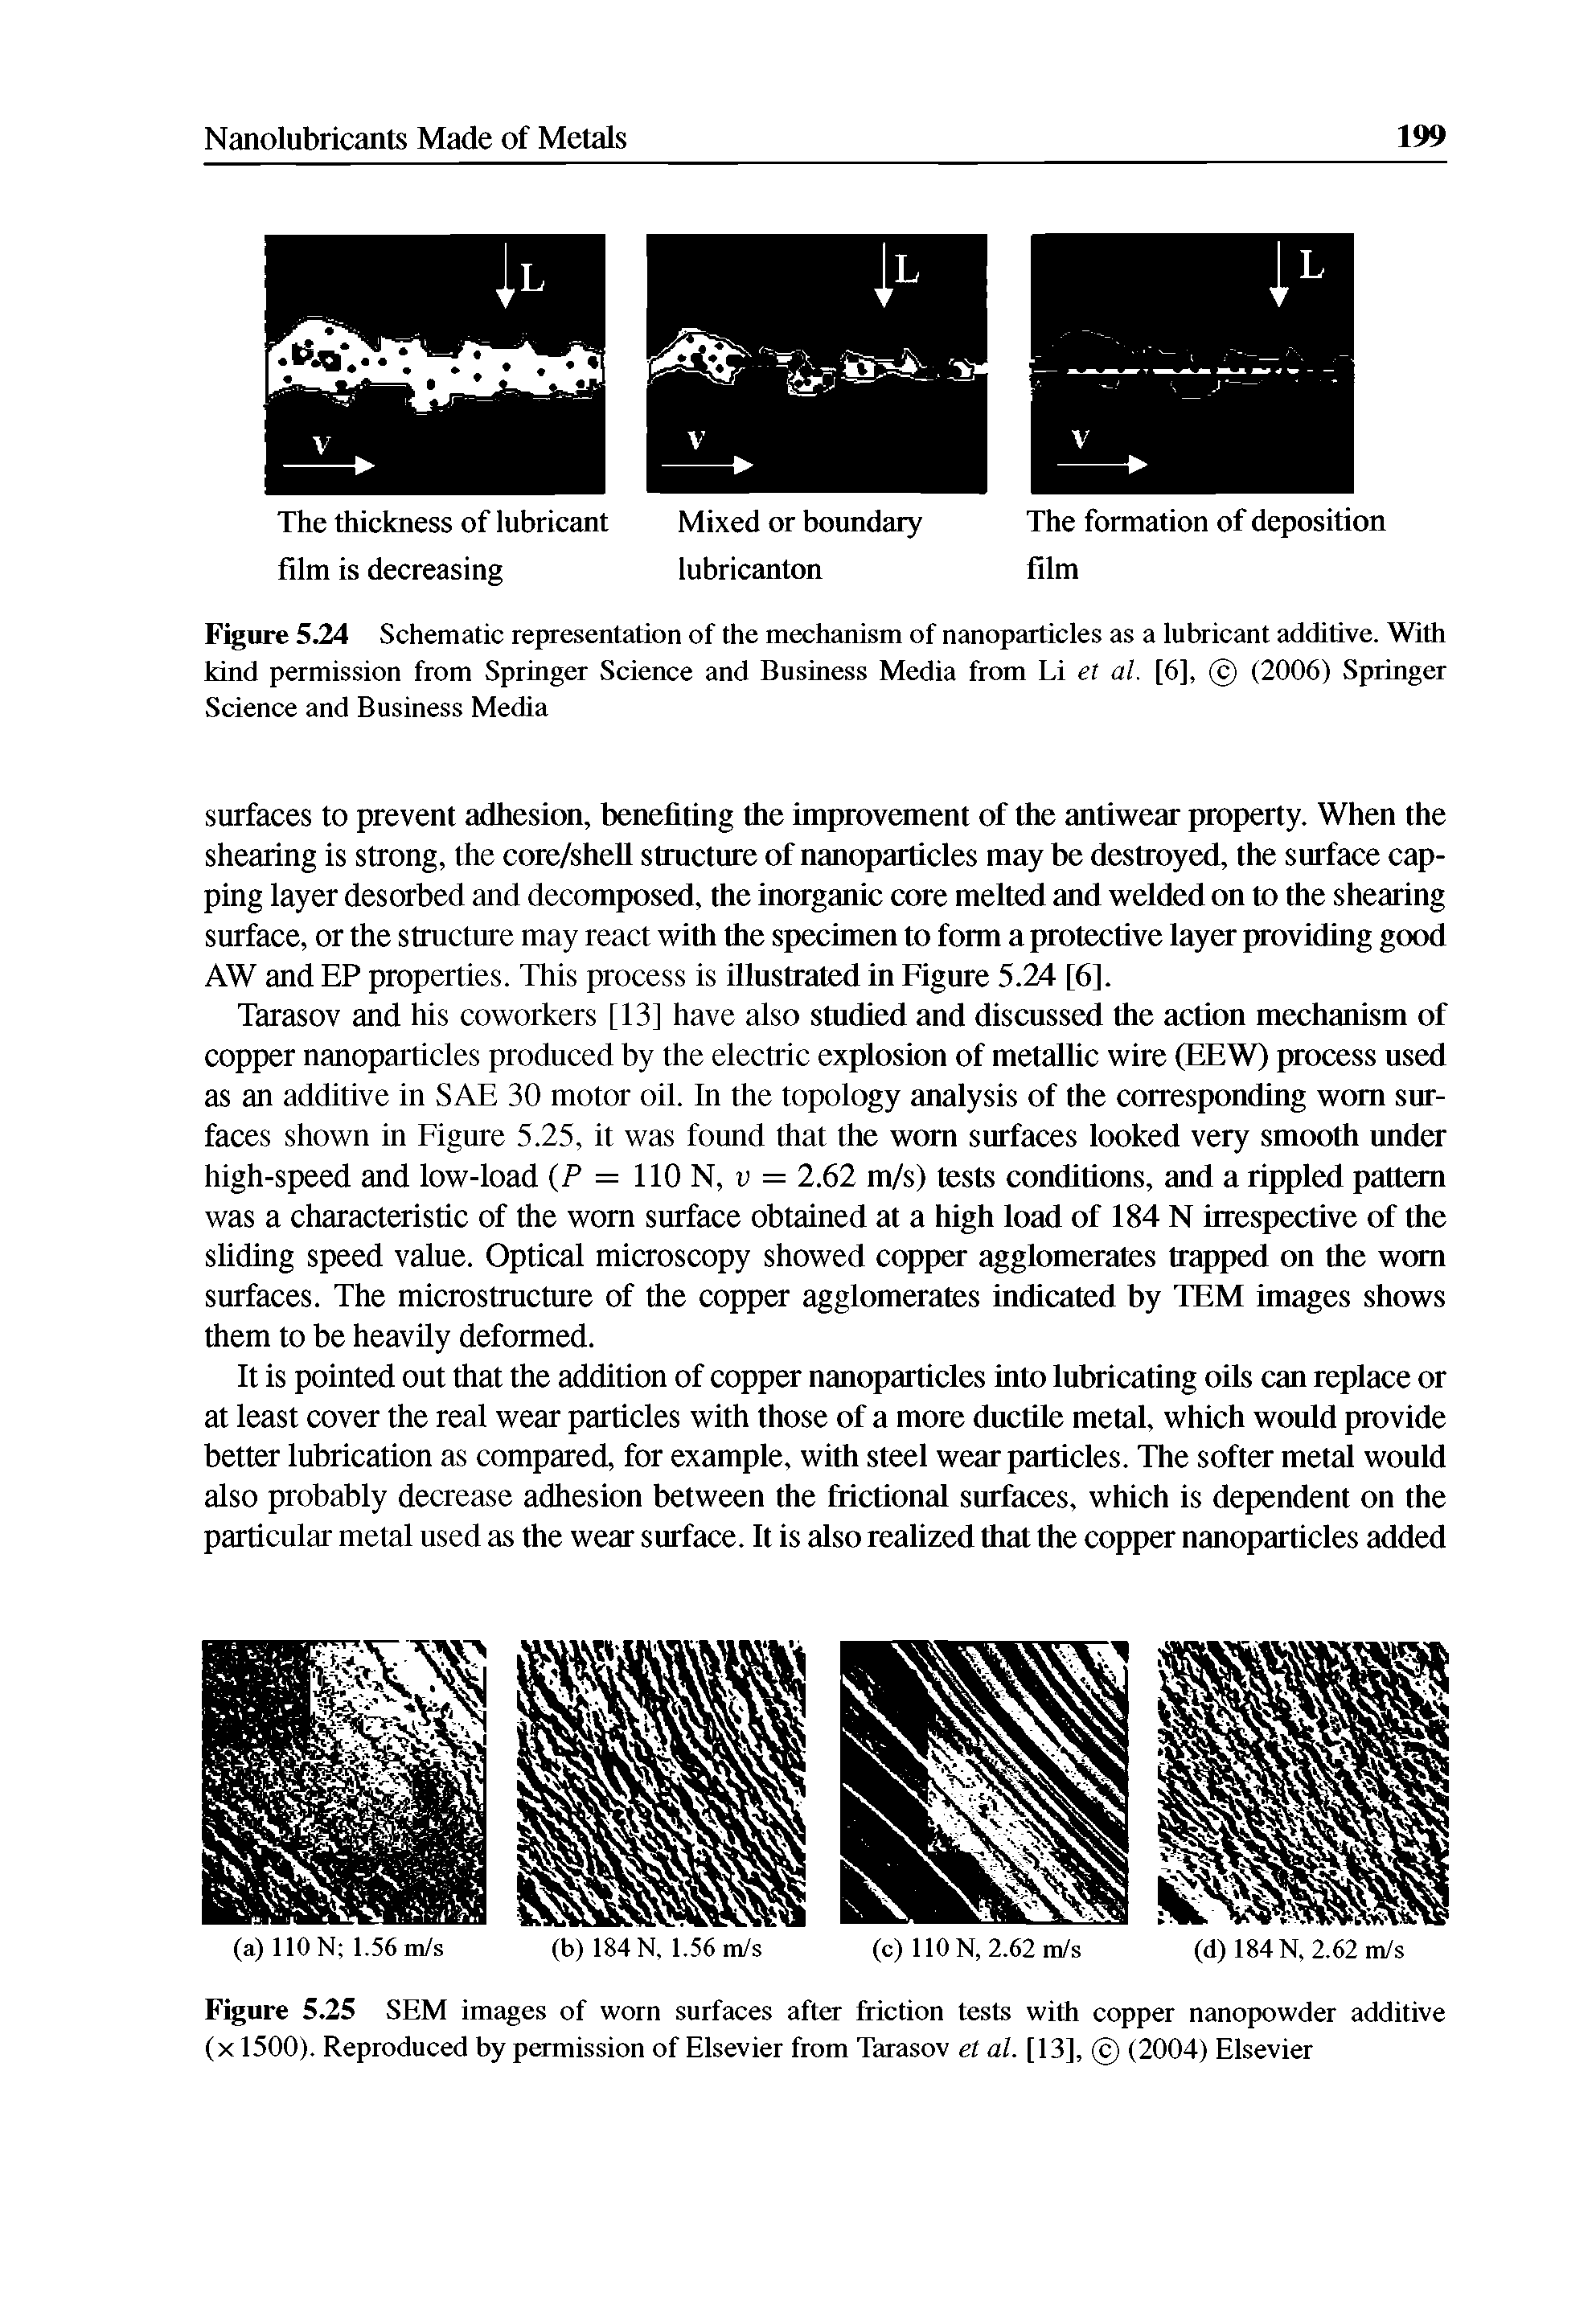 Figure 5.25 SEM images of worn surfaces after friction tests with copper nanopowder additive (x 1500). Reproduced by permission of Elsevier from Tarasov et al. [13], (2004) Elsevier...